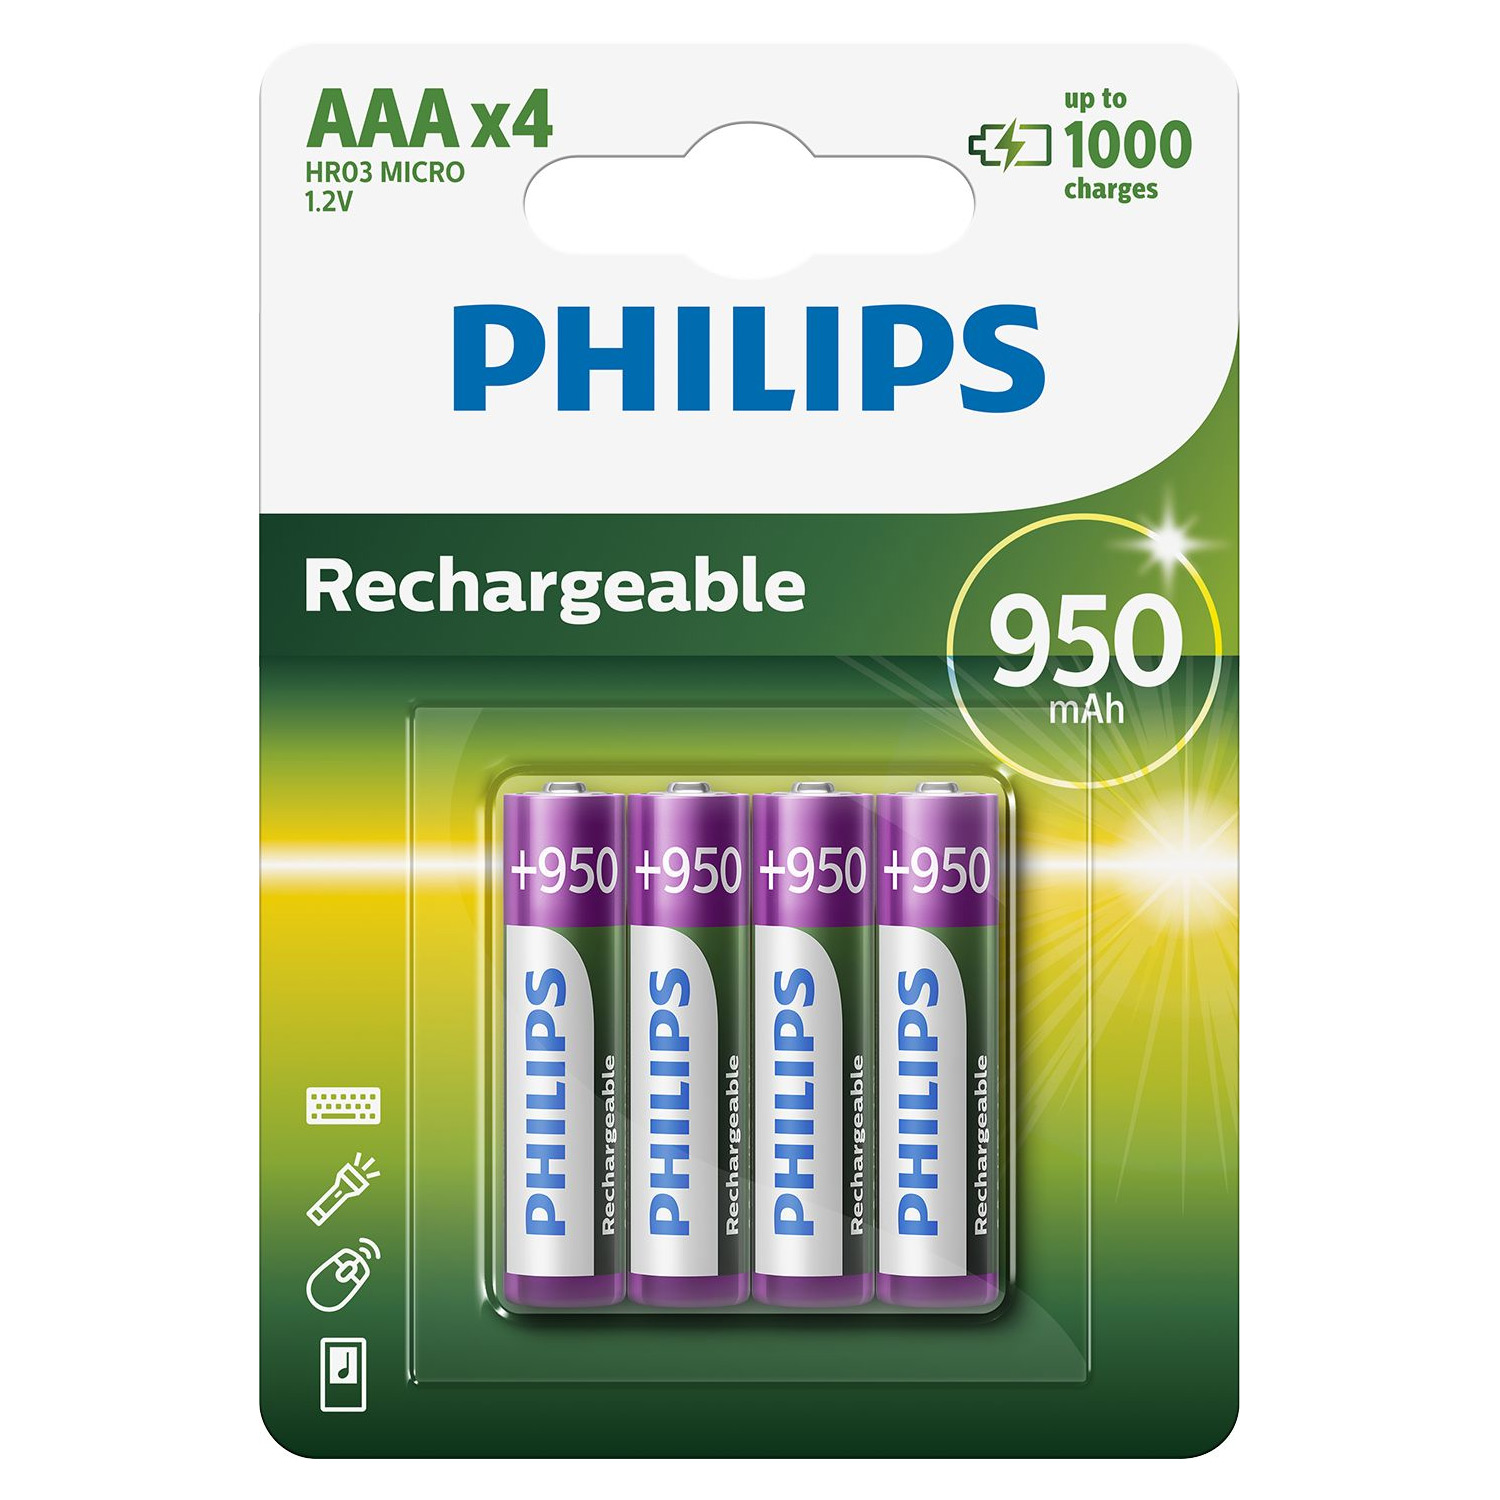 VARTA Ready2Use Rechargeable Micro Ni-Mh AAA Batteries 1000 mAh Pack of 4